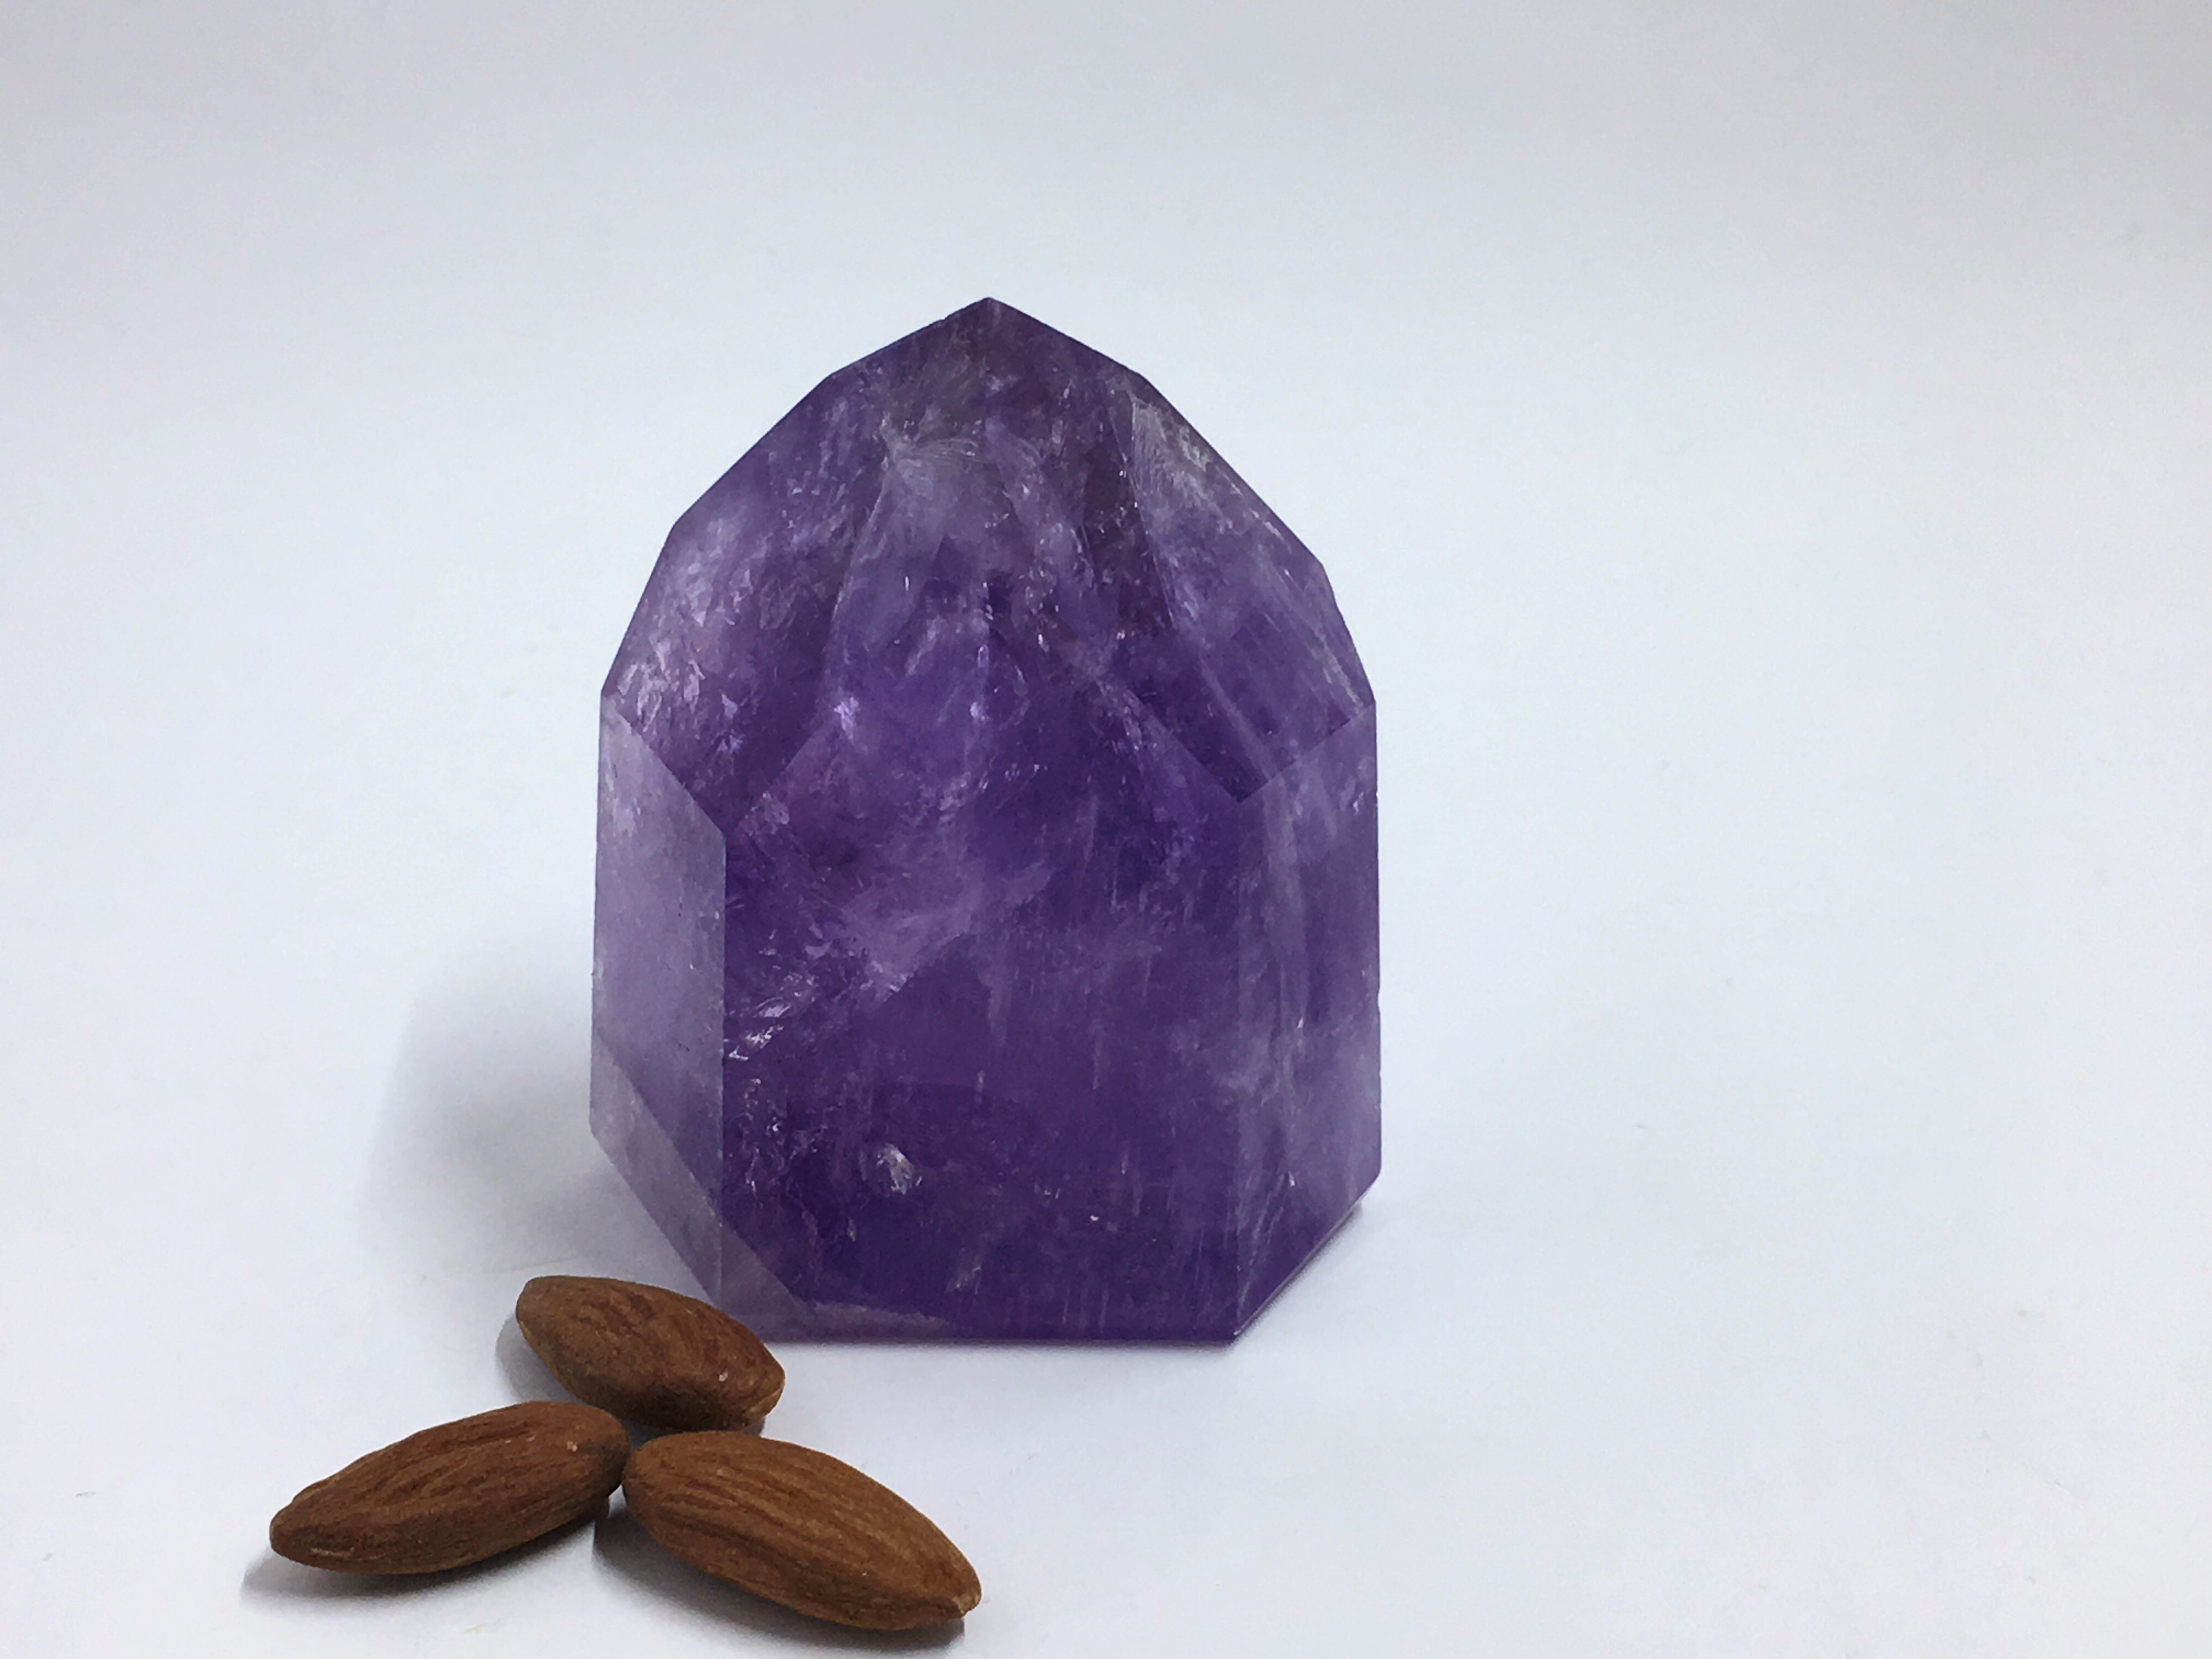 Amethyst - Polished Standing Point (Small-Med.)